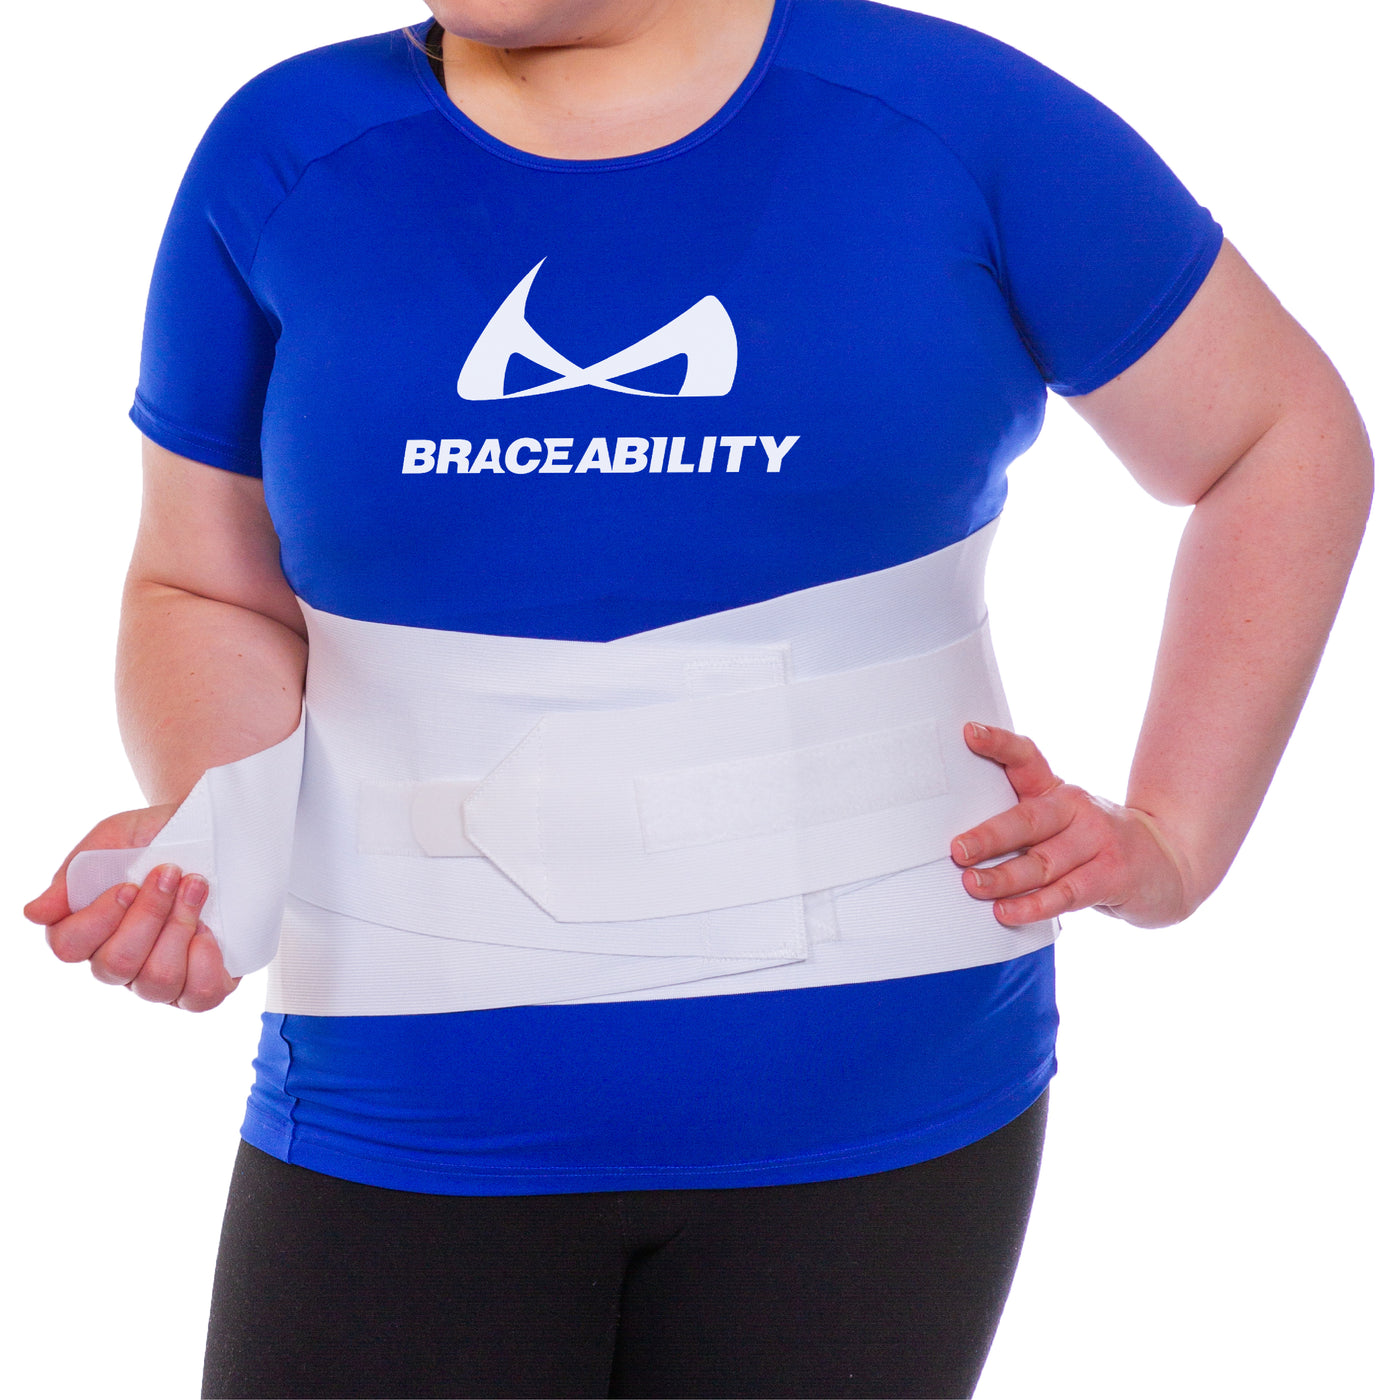 This bariatric back support for treatment of pain in the lumbar back features crisscross straps as well as double-pull tension straps for ultimate support and compression